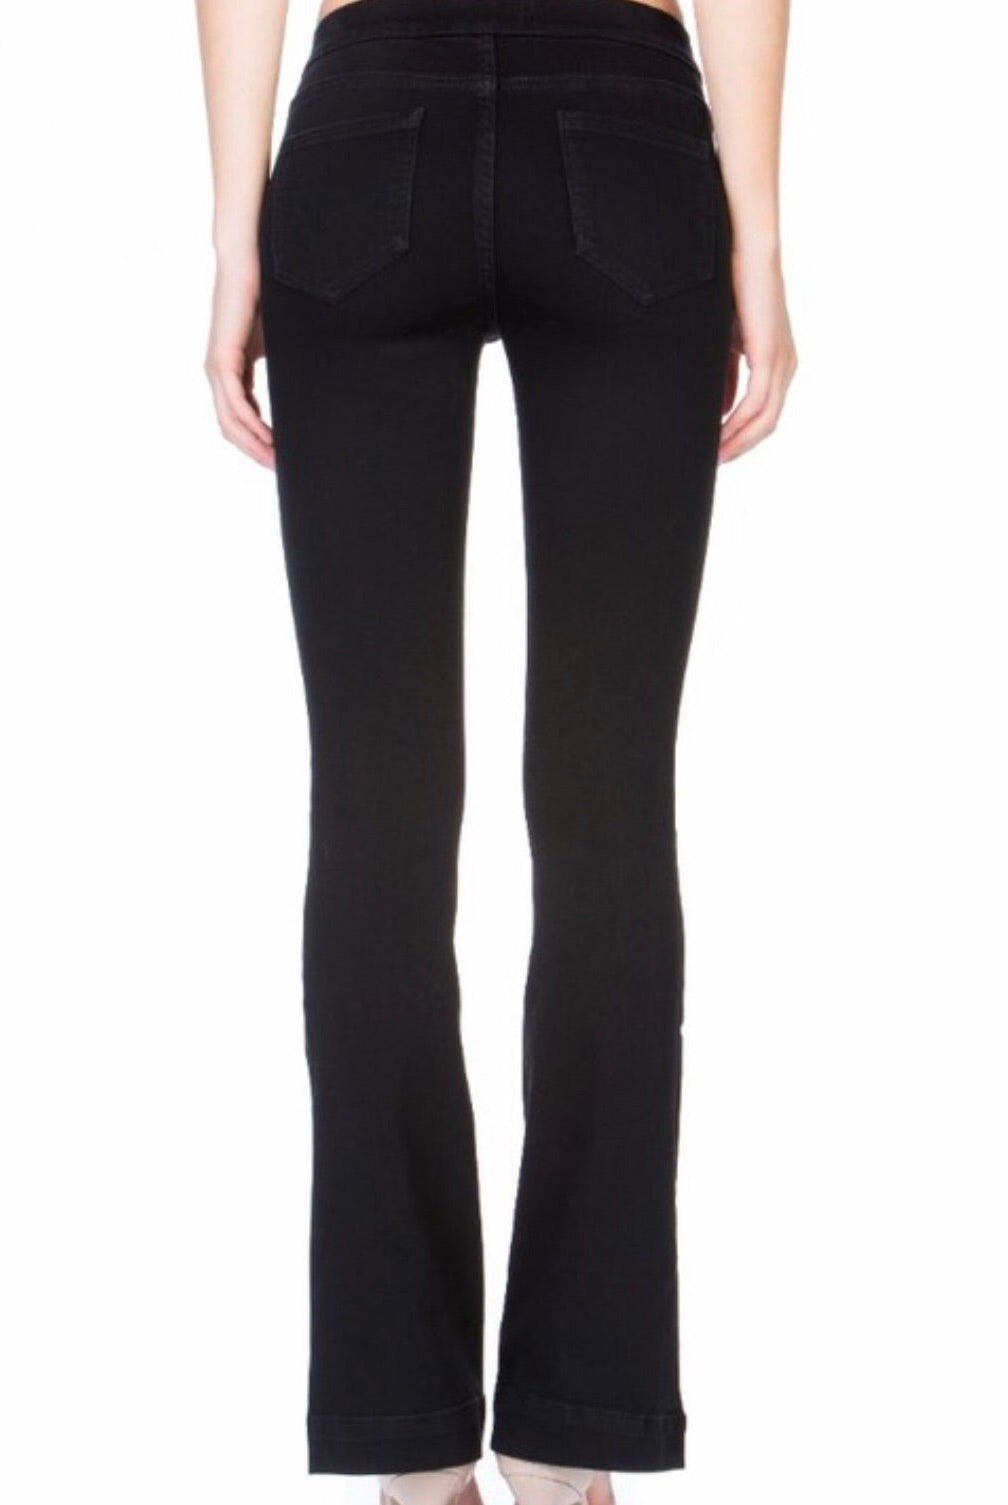 Cello Pull On Flare Jeans - Black - jeans -Jimberly's Boutique-Olive Branch-Mississippi